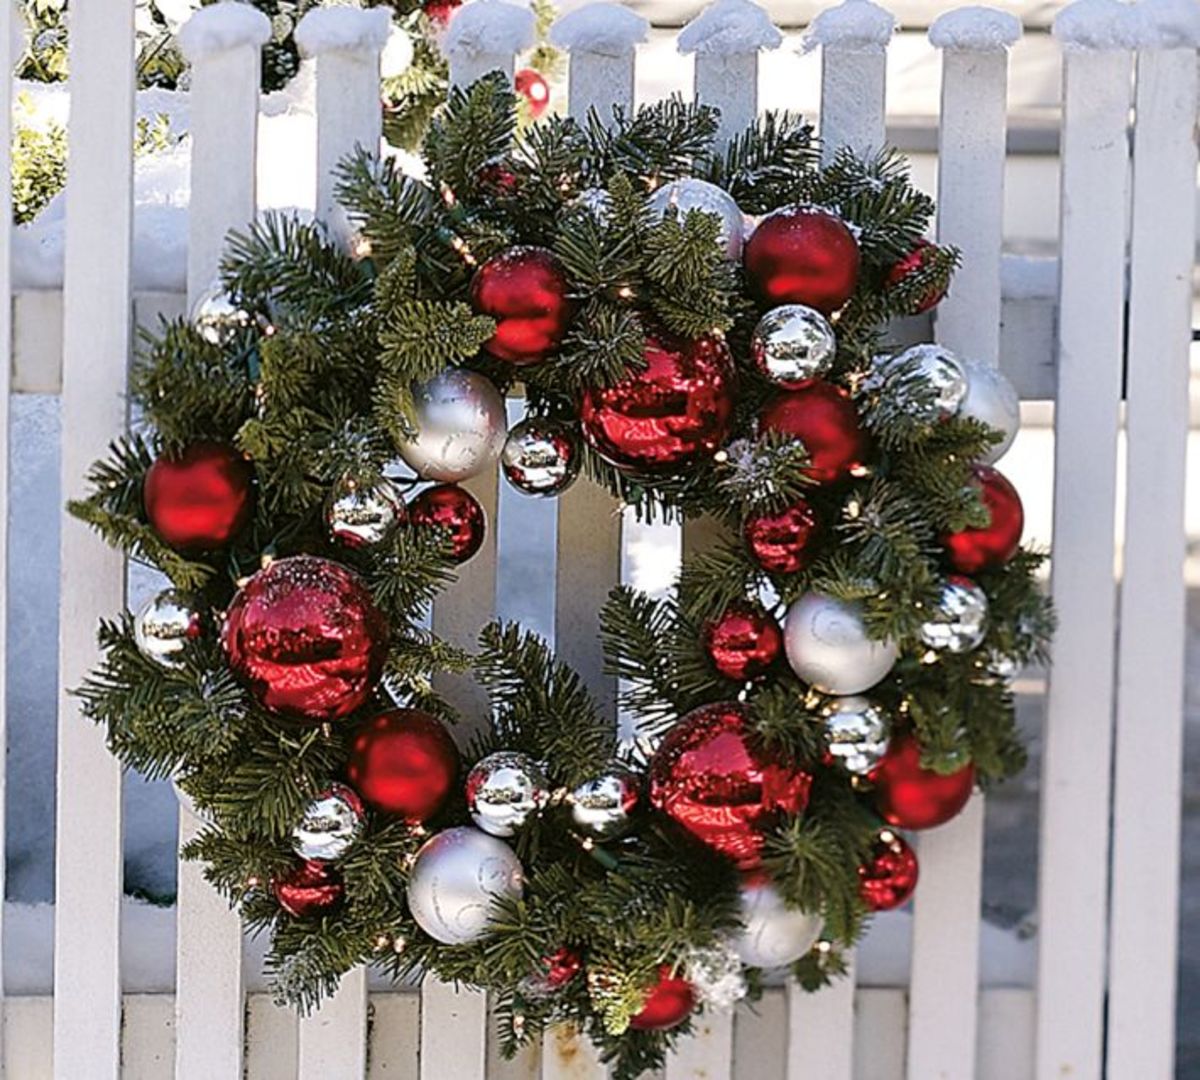 10 Ways to Decorate Evergreen Wreaths Decoration Ideas for the